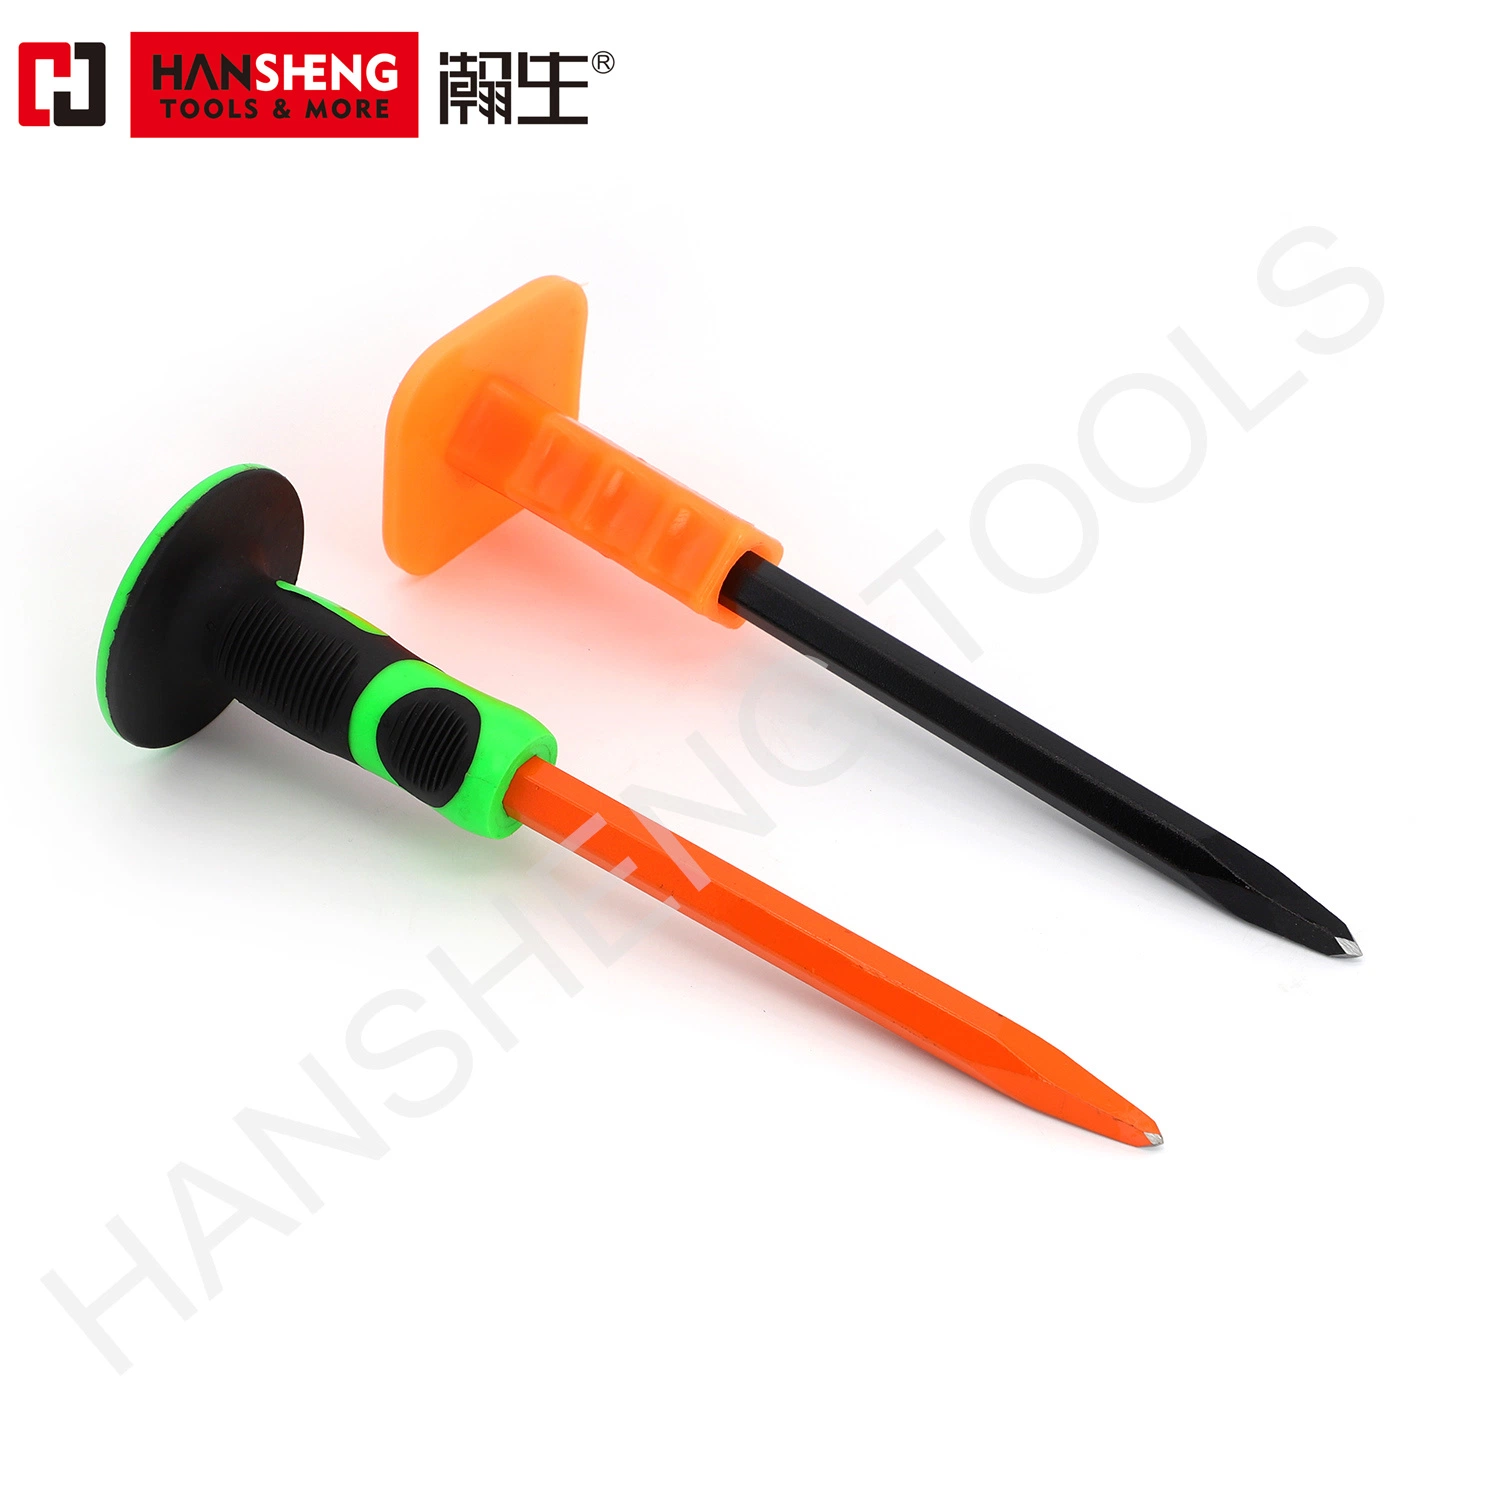 Profession Chisel, Demolition Tools, Hand Tool, Hardware Tools, Chisel Bit, High quality/High cost performance , Hydraulic Breaker Chisel